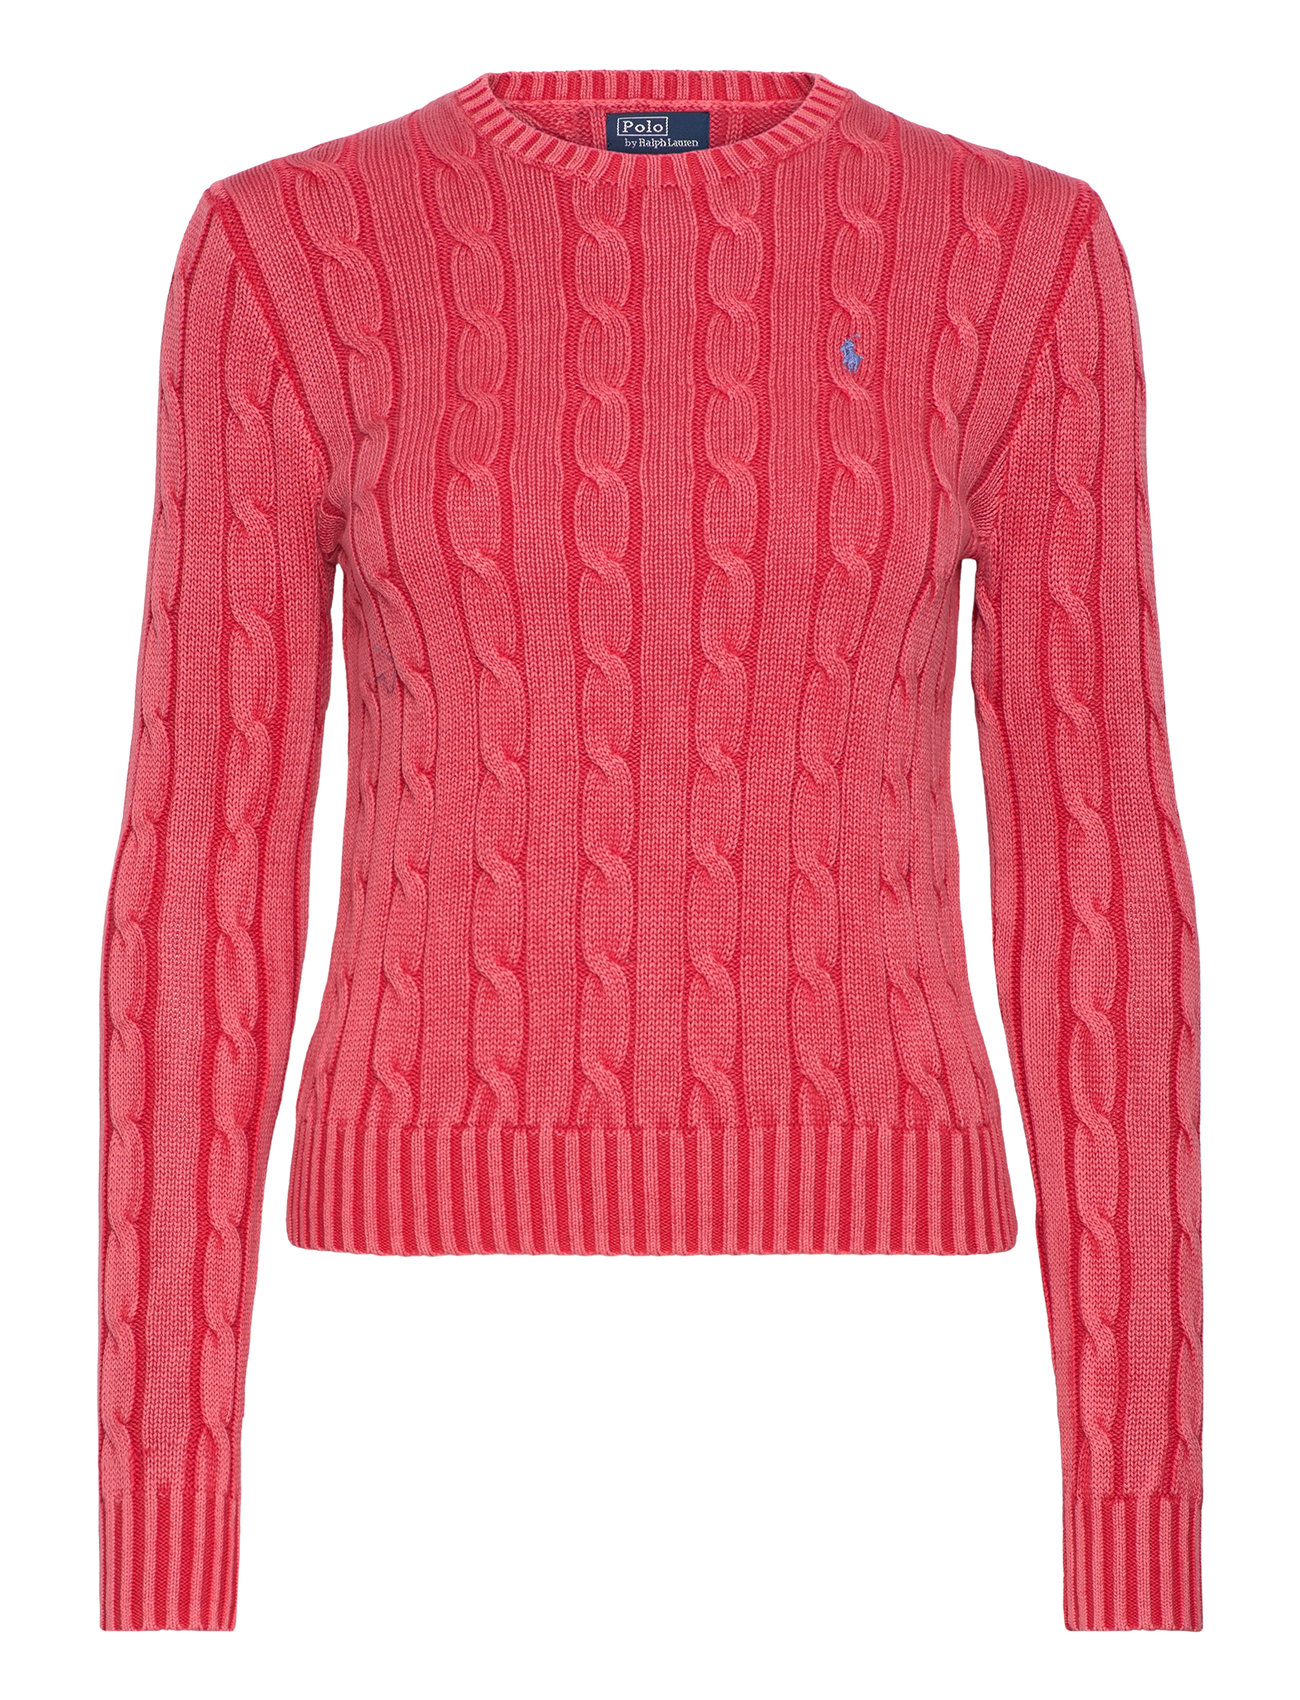 Cable-Knit Cotton Crewneck Sweater Tops Knitwear Jumpers Red Polo Ralph Lauren